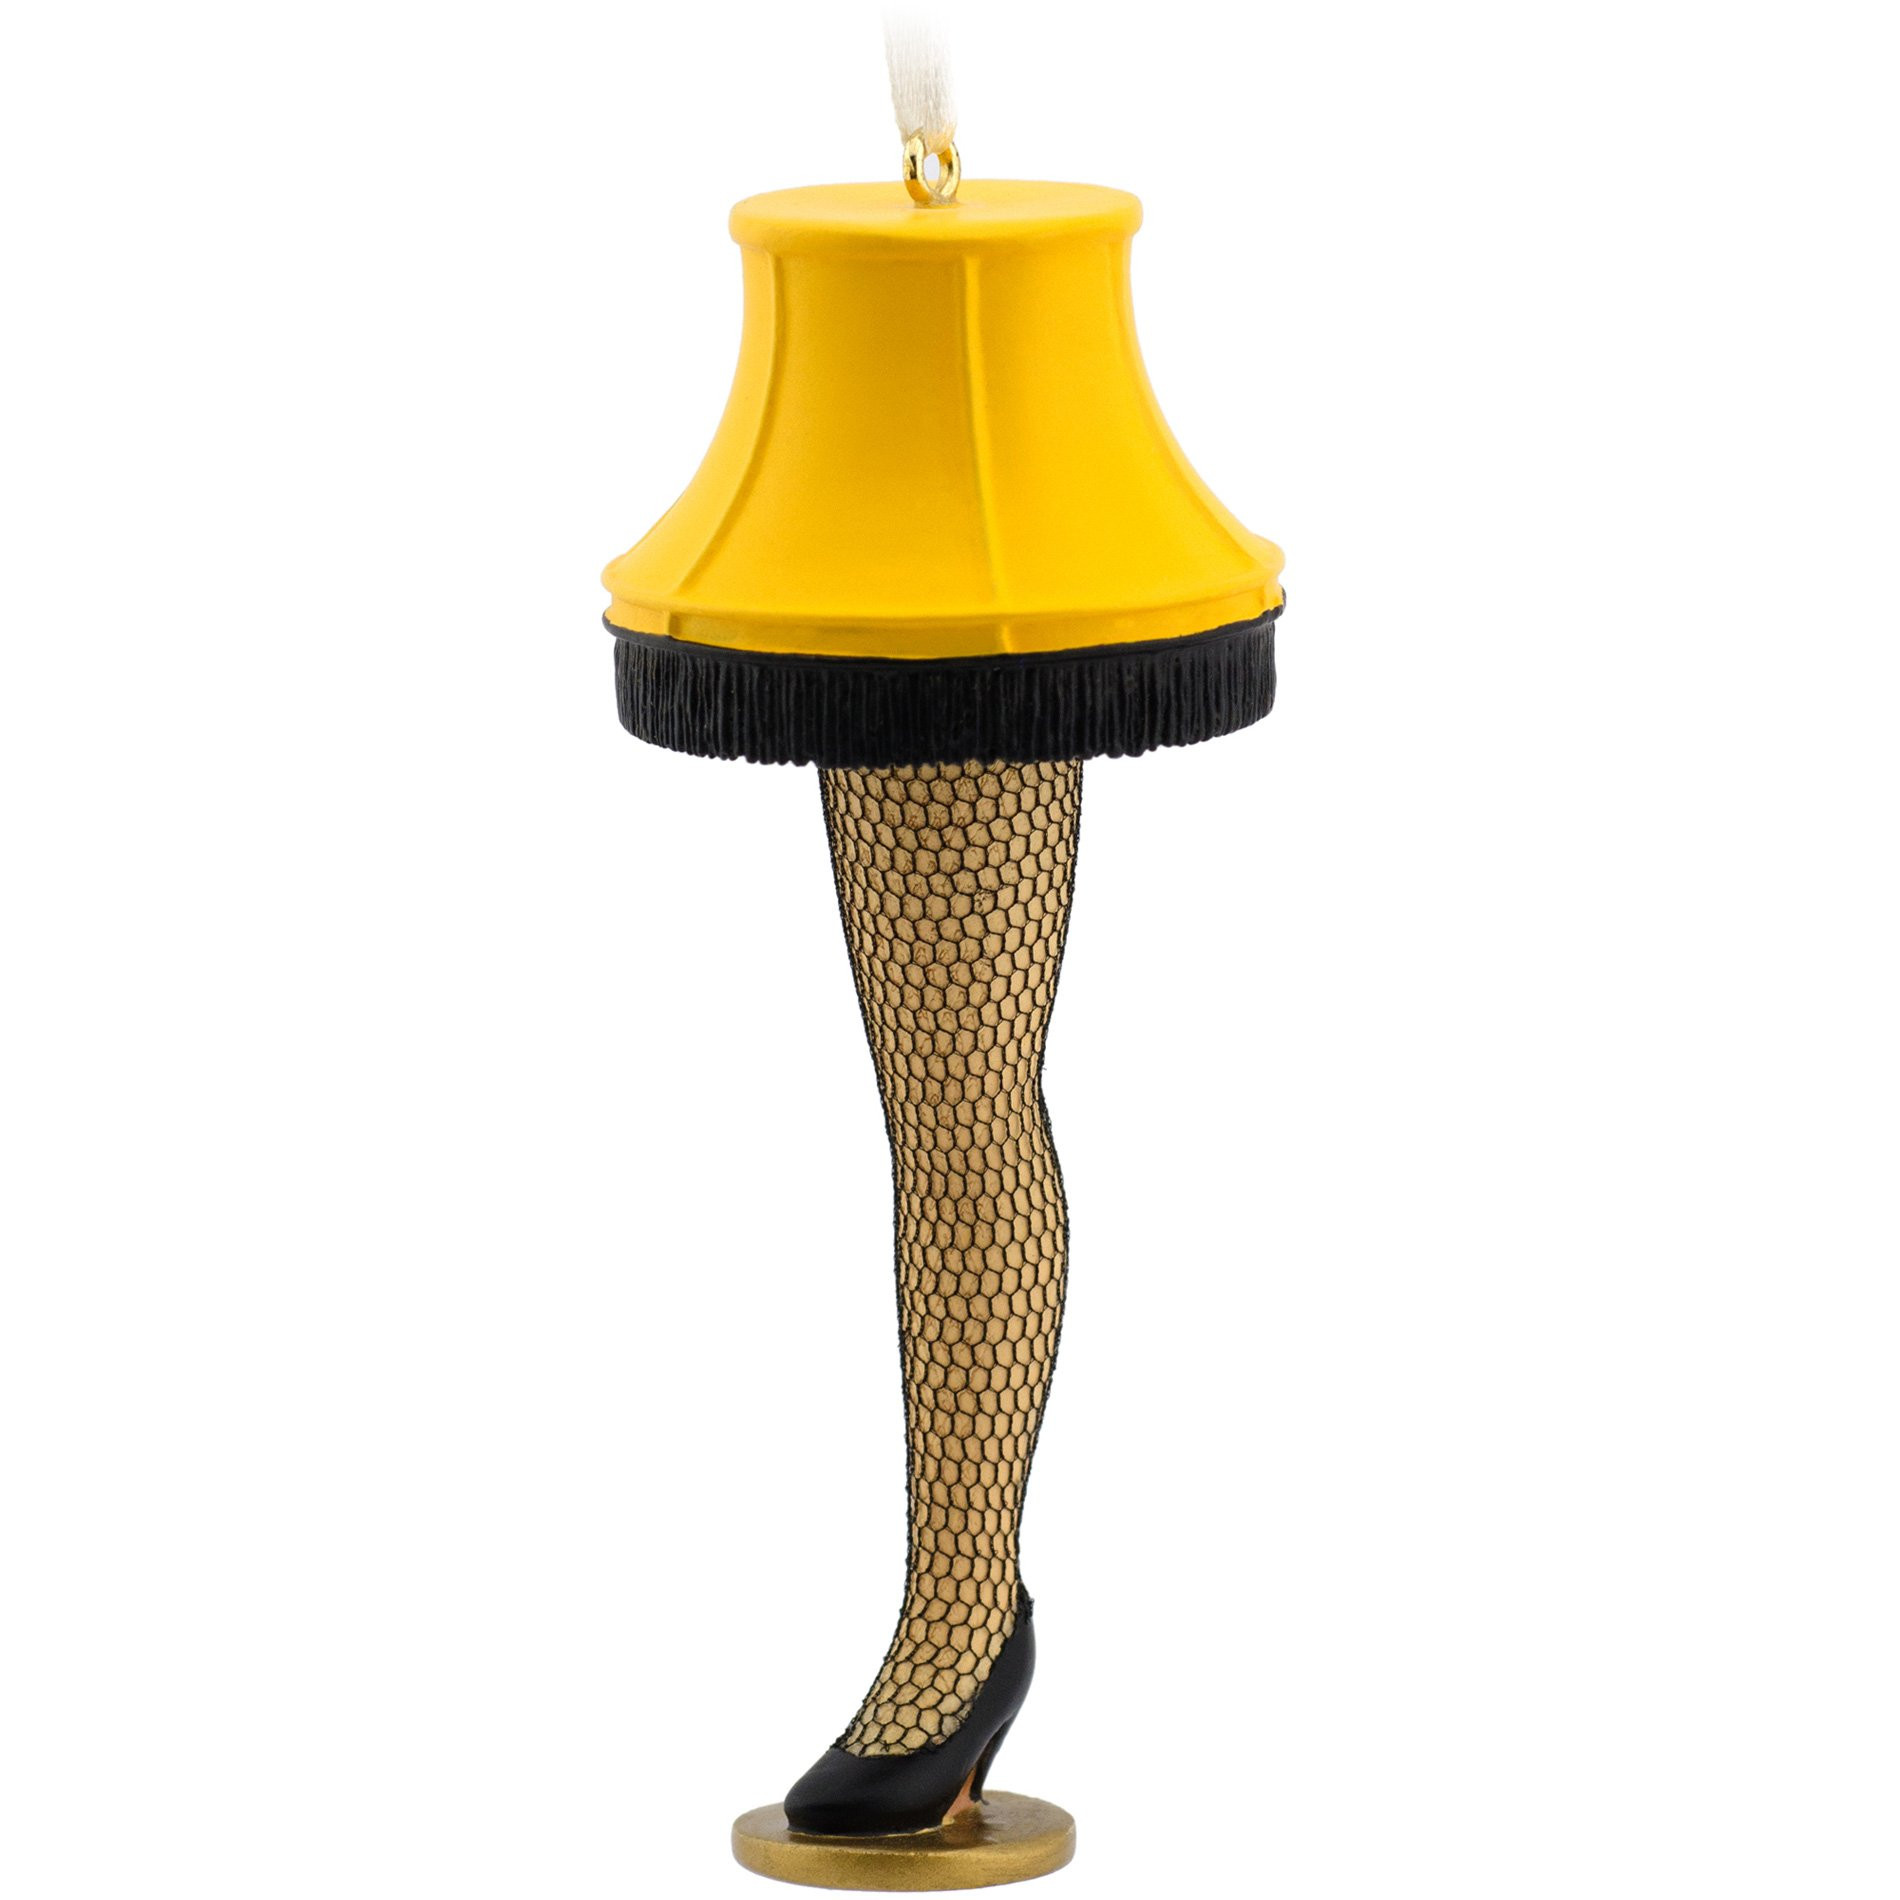 Christmas Story Leg Lamp Ornaments
 Channel a hilarious moment from your favorite holiday